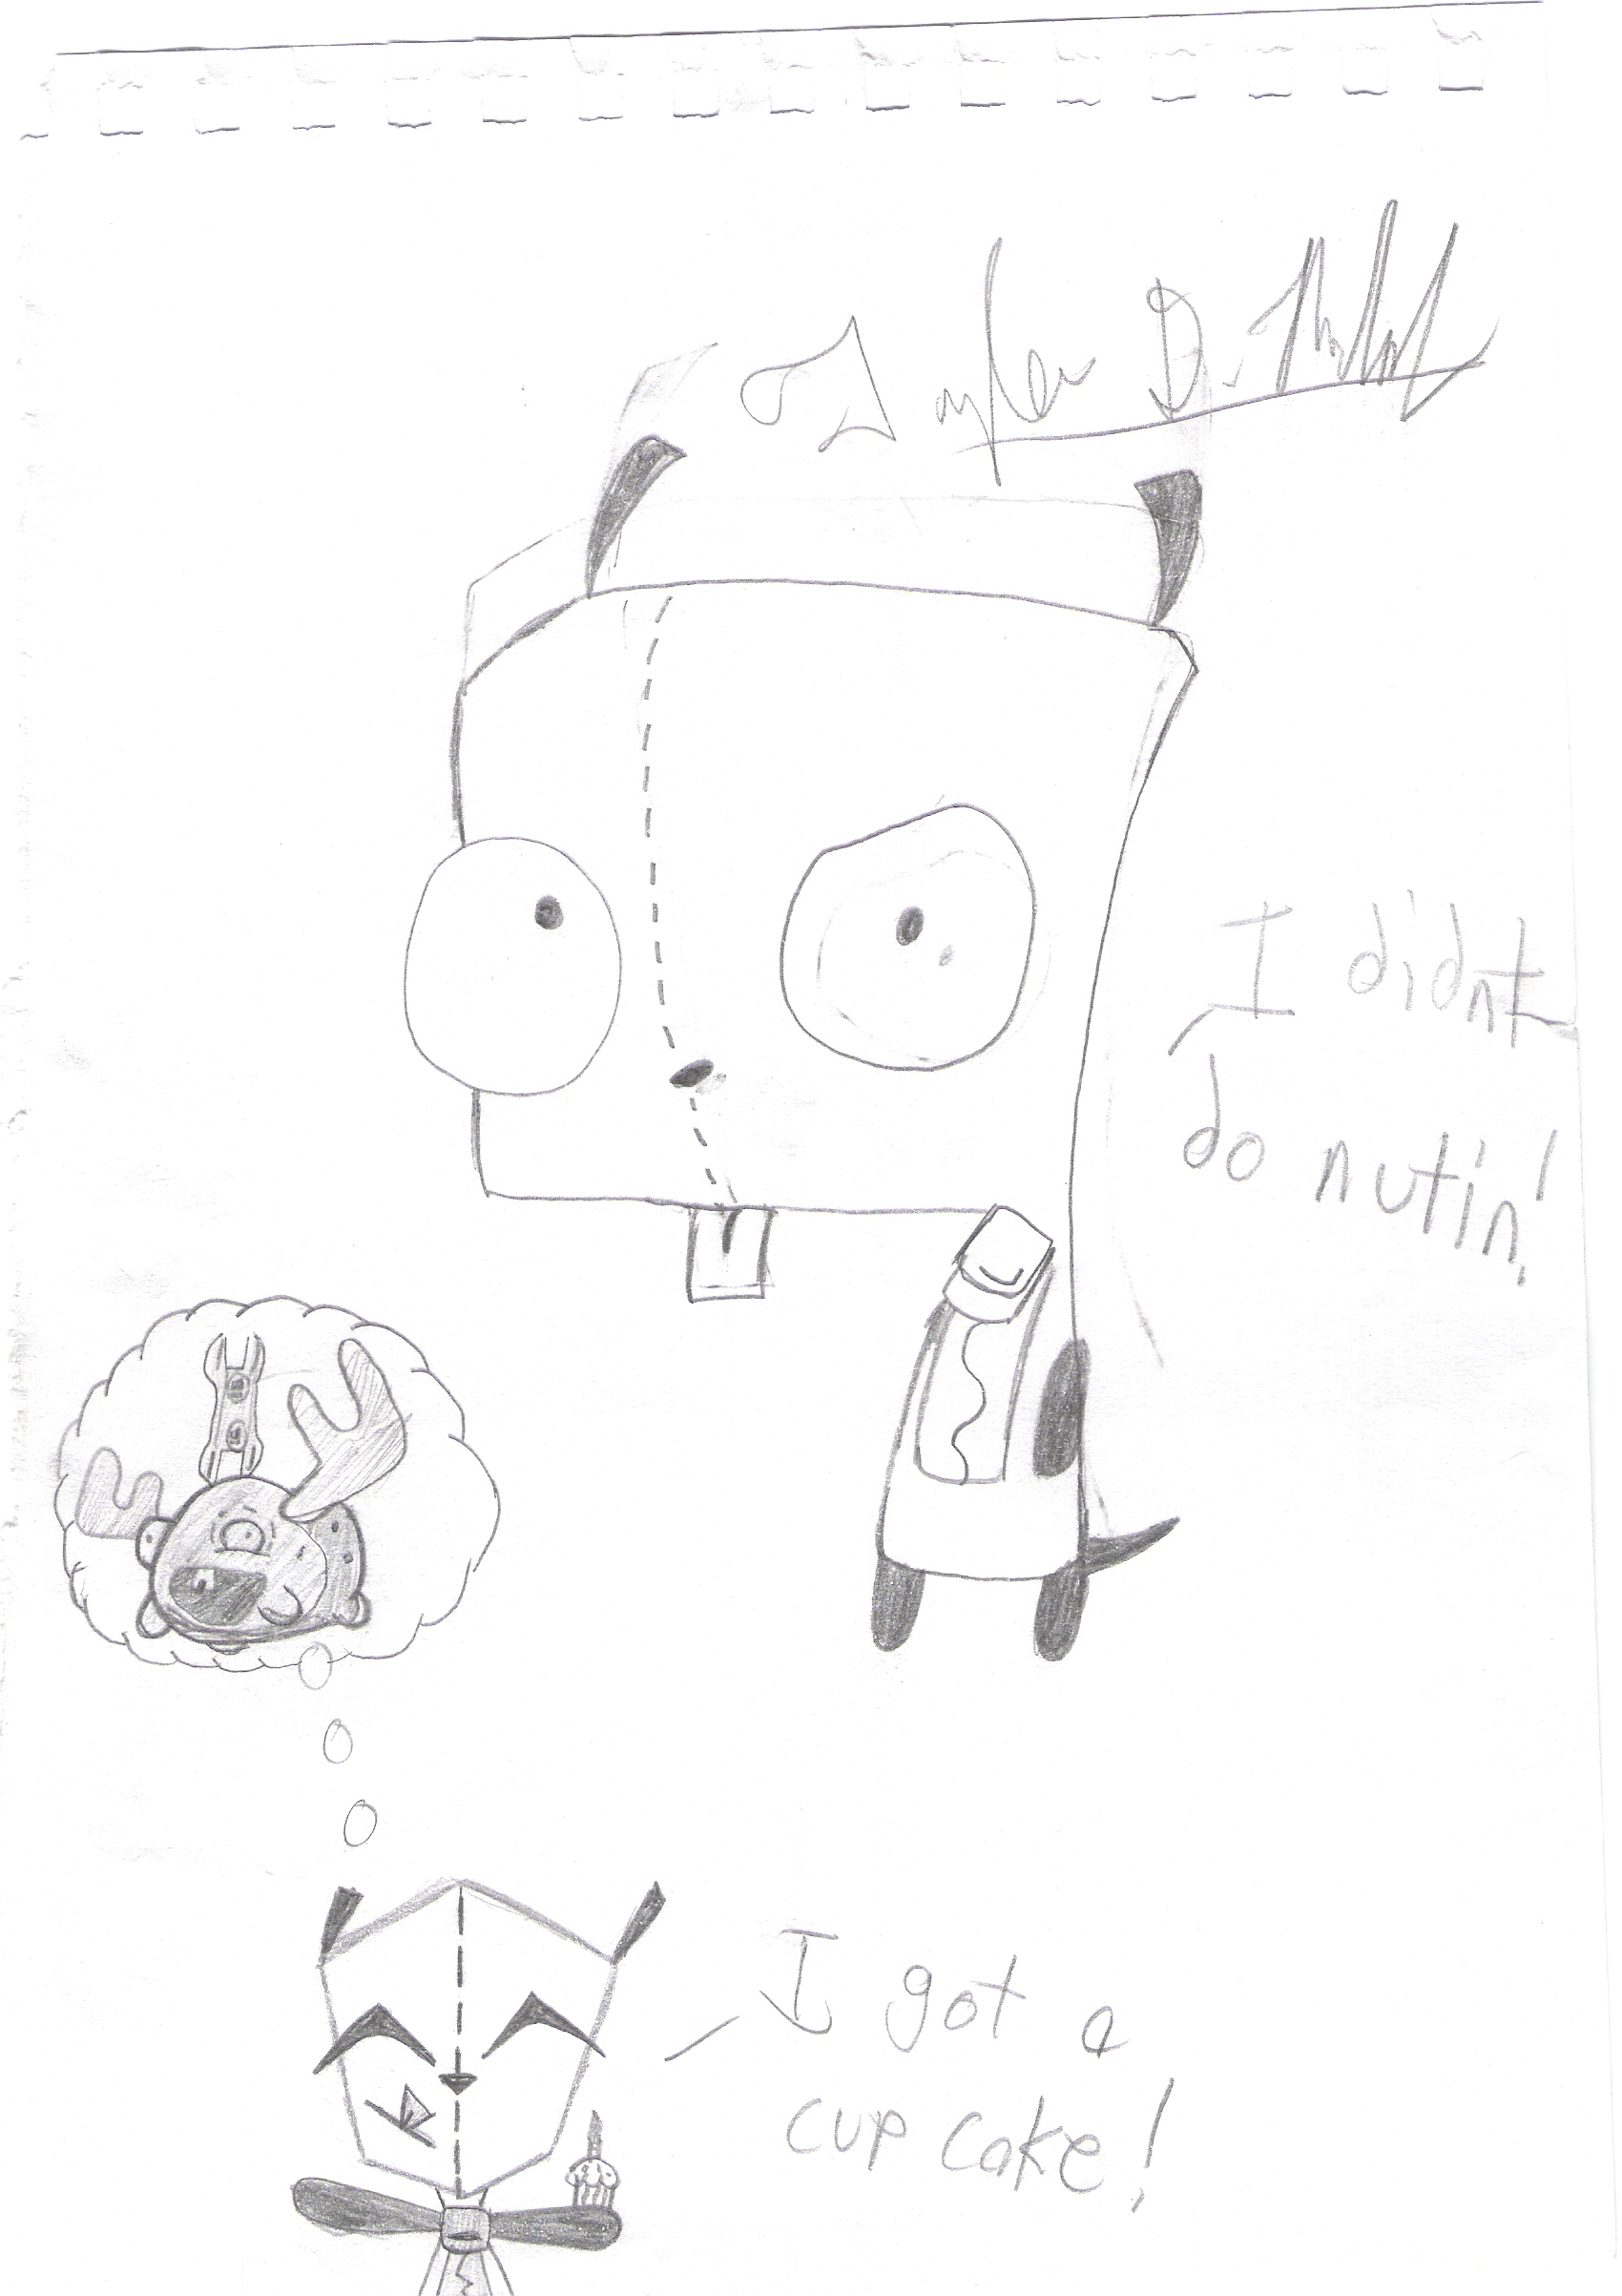 Gir's thoughts by Lurking_Shadow_Creature